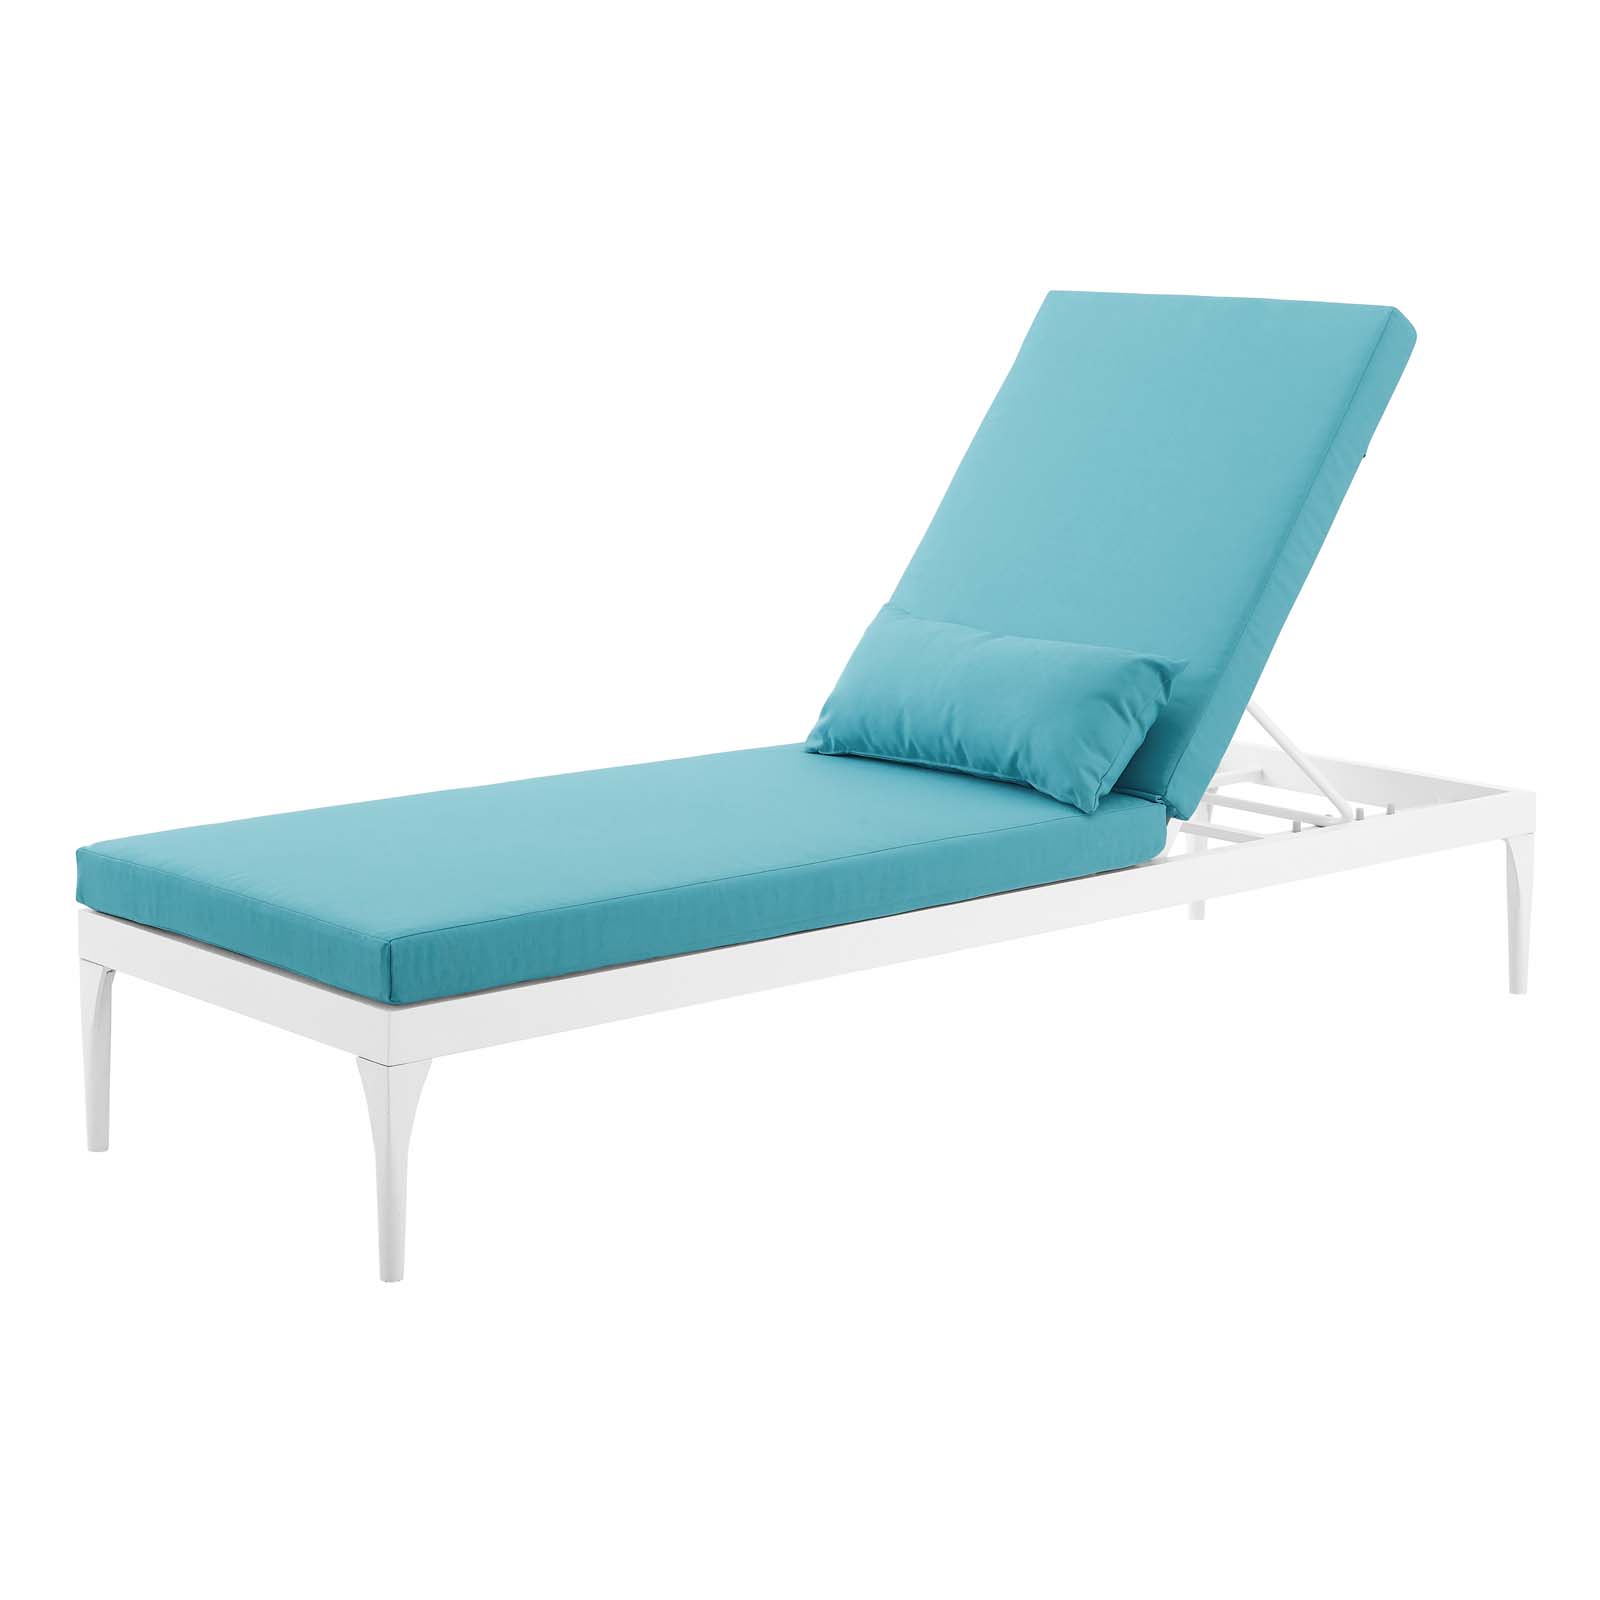 Modern Contemporary Urban Design Outdoor Patio Balcony Garden Furniture Lounge Chair Chaise, Fabric Metal Steel, White Blue - image 1 of 7